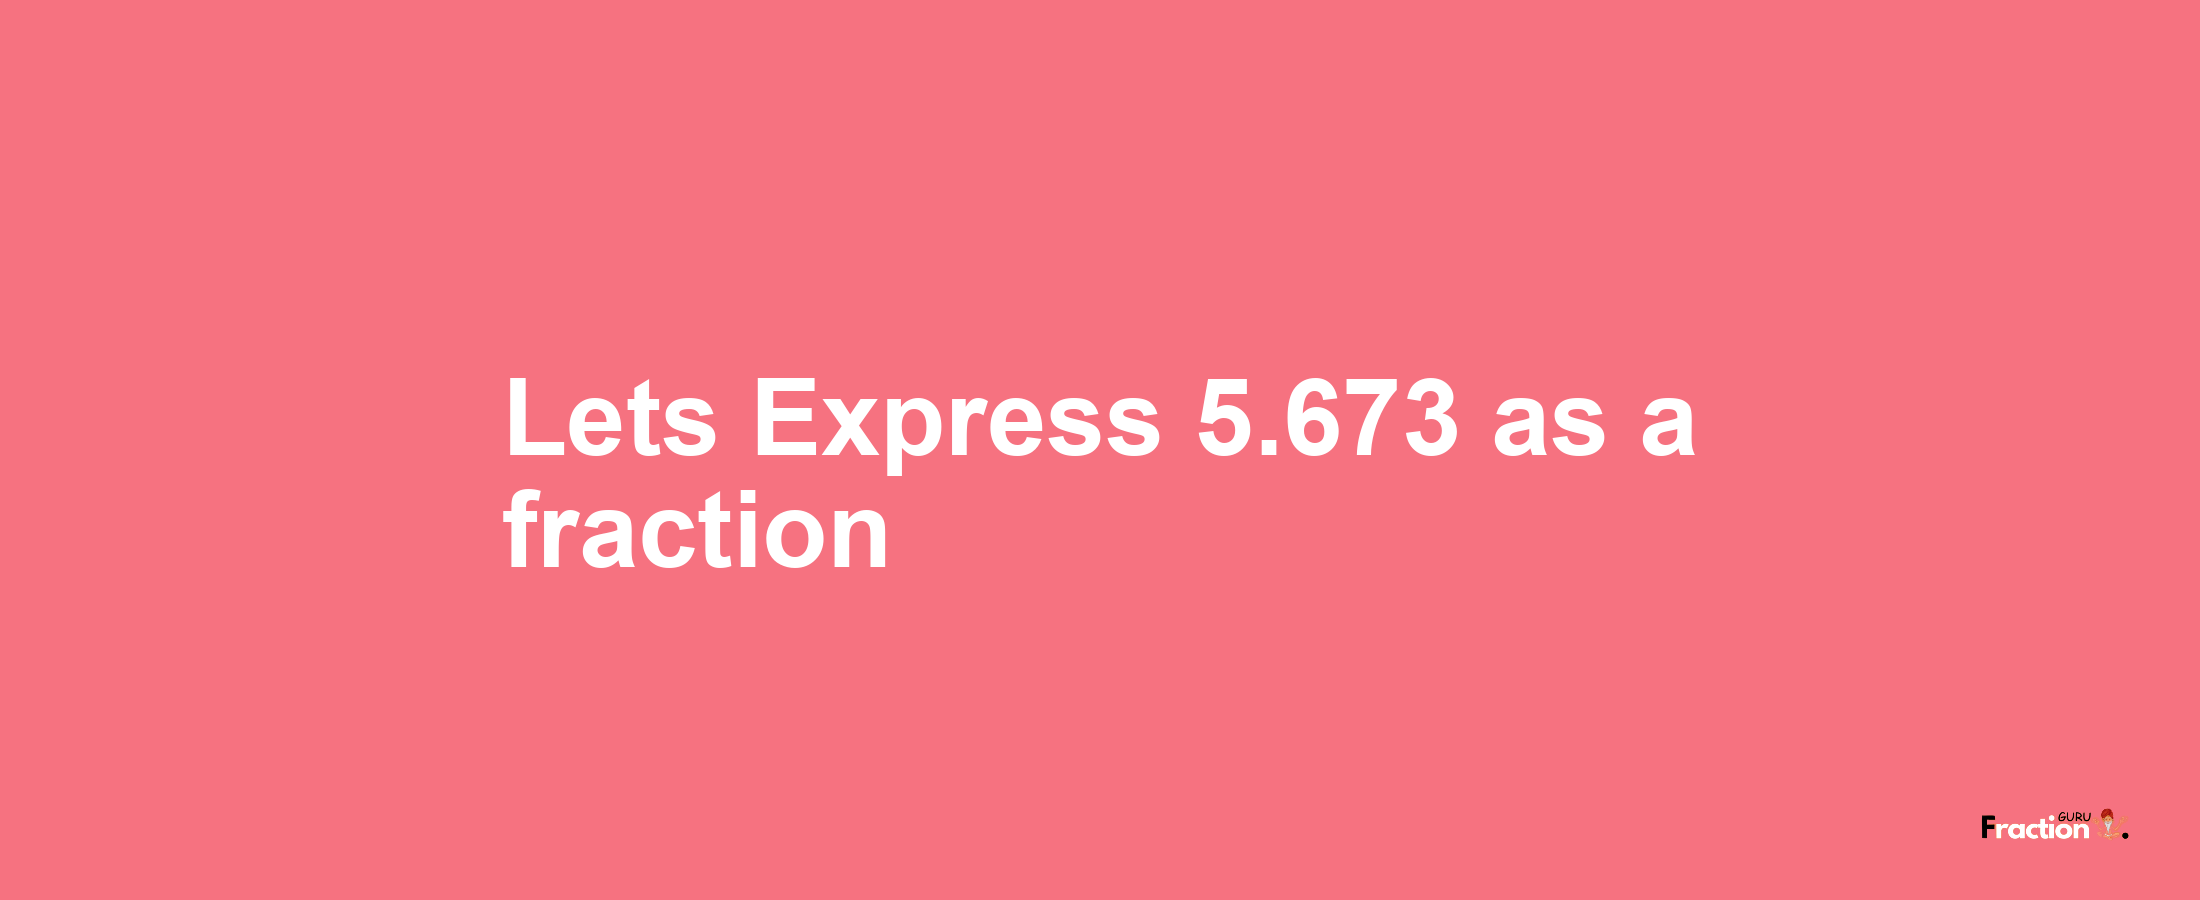 Lets Express 5.673 as afraction